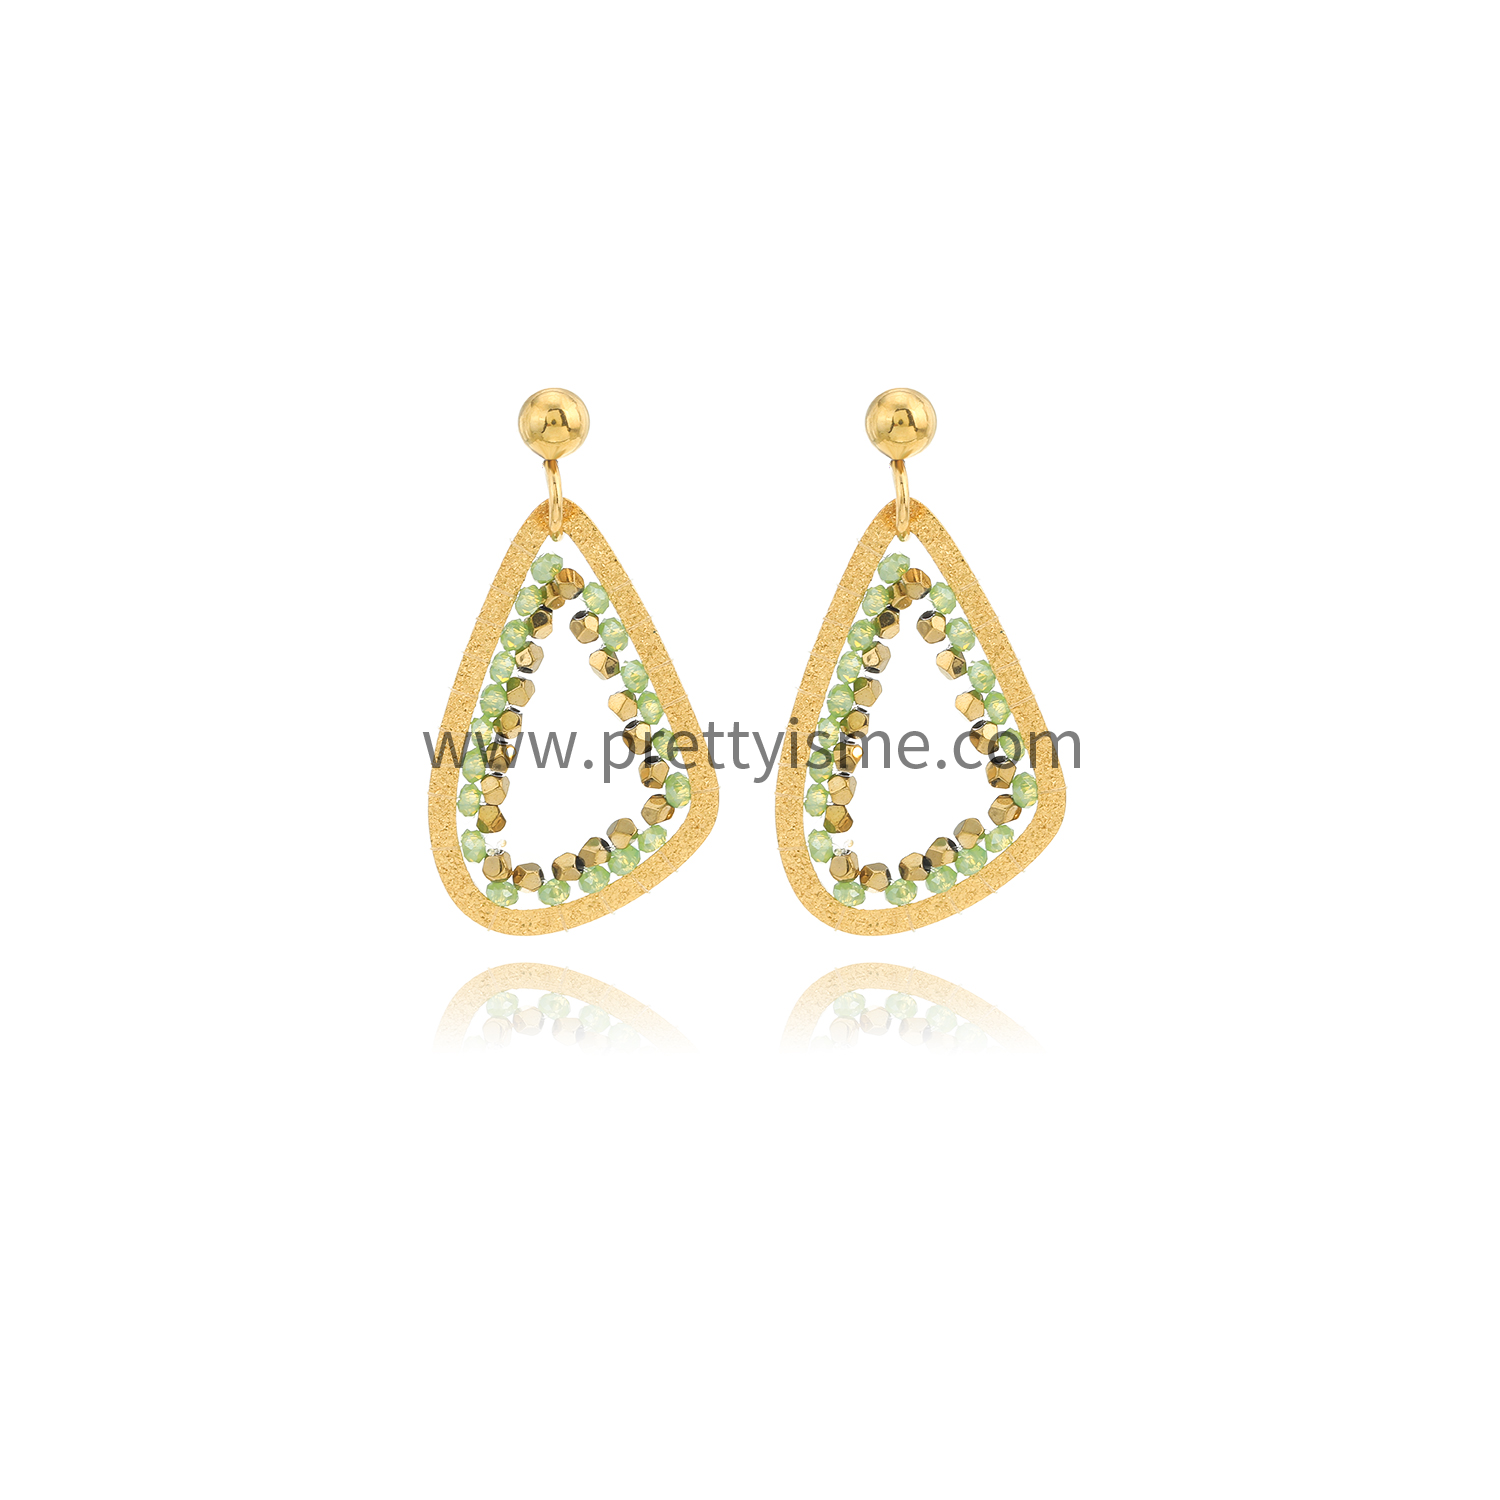 Oval Stainless Steel Earrings Gold Plated 18K with Green Beads (5).webp